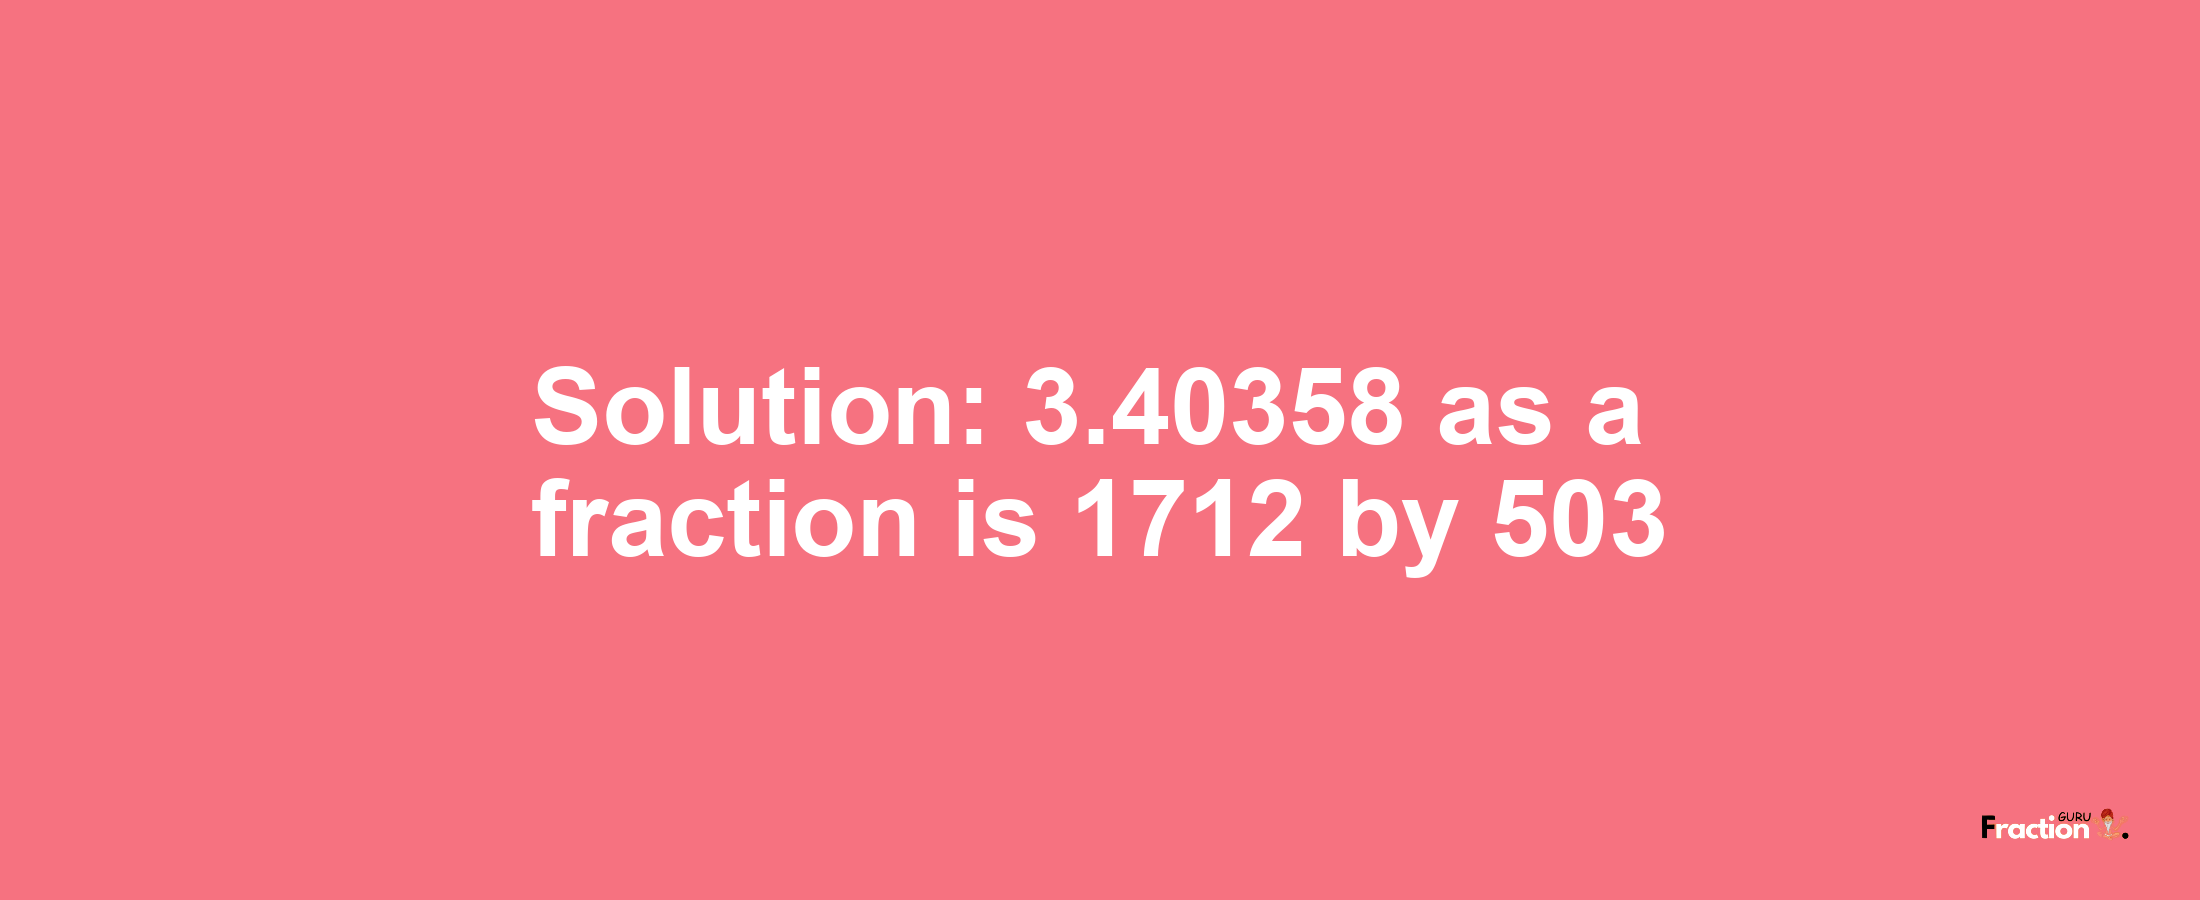 Solution:3.40358 as a fraction is 1712/503